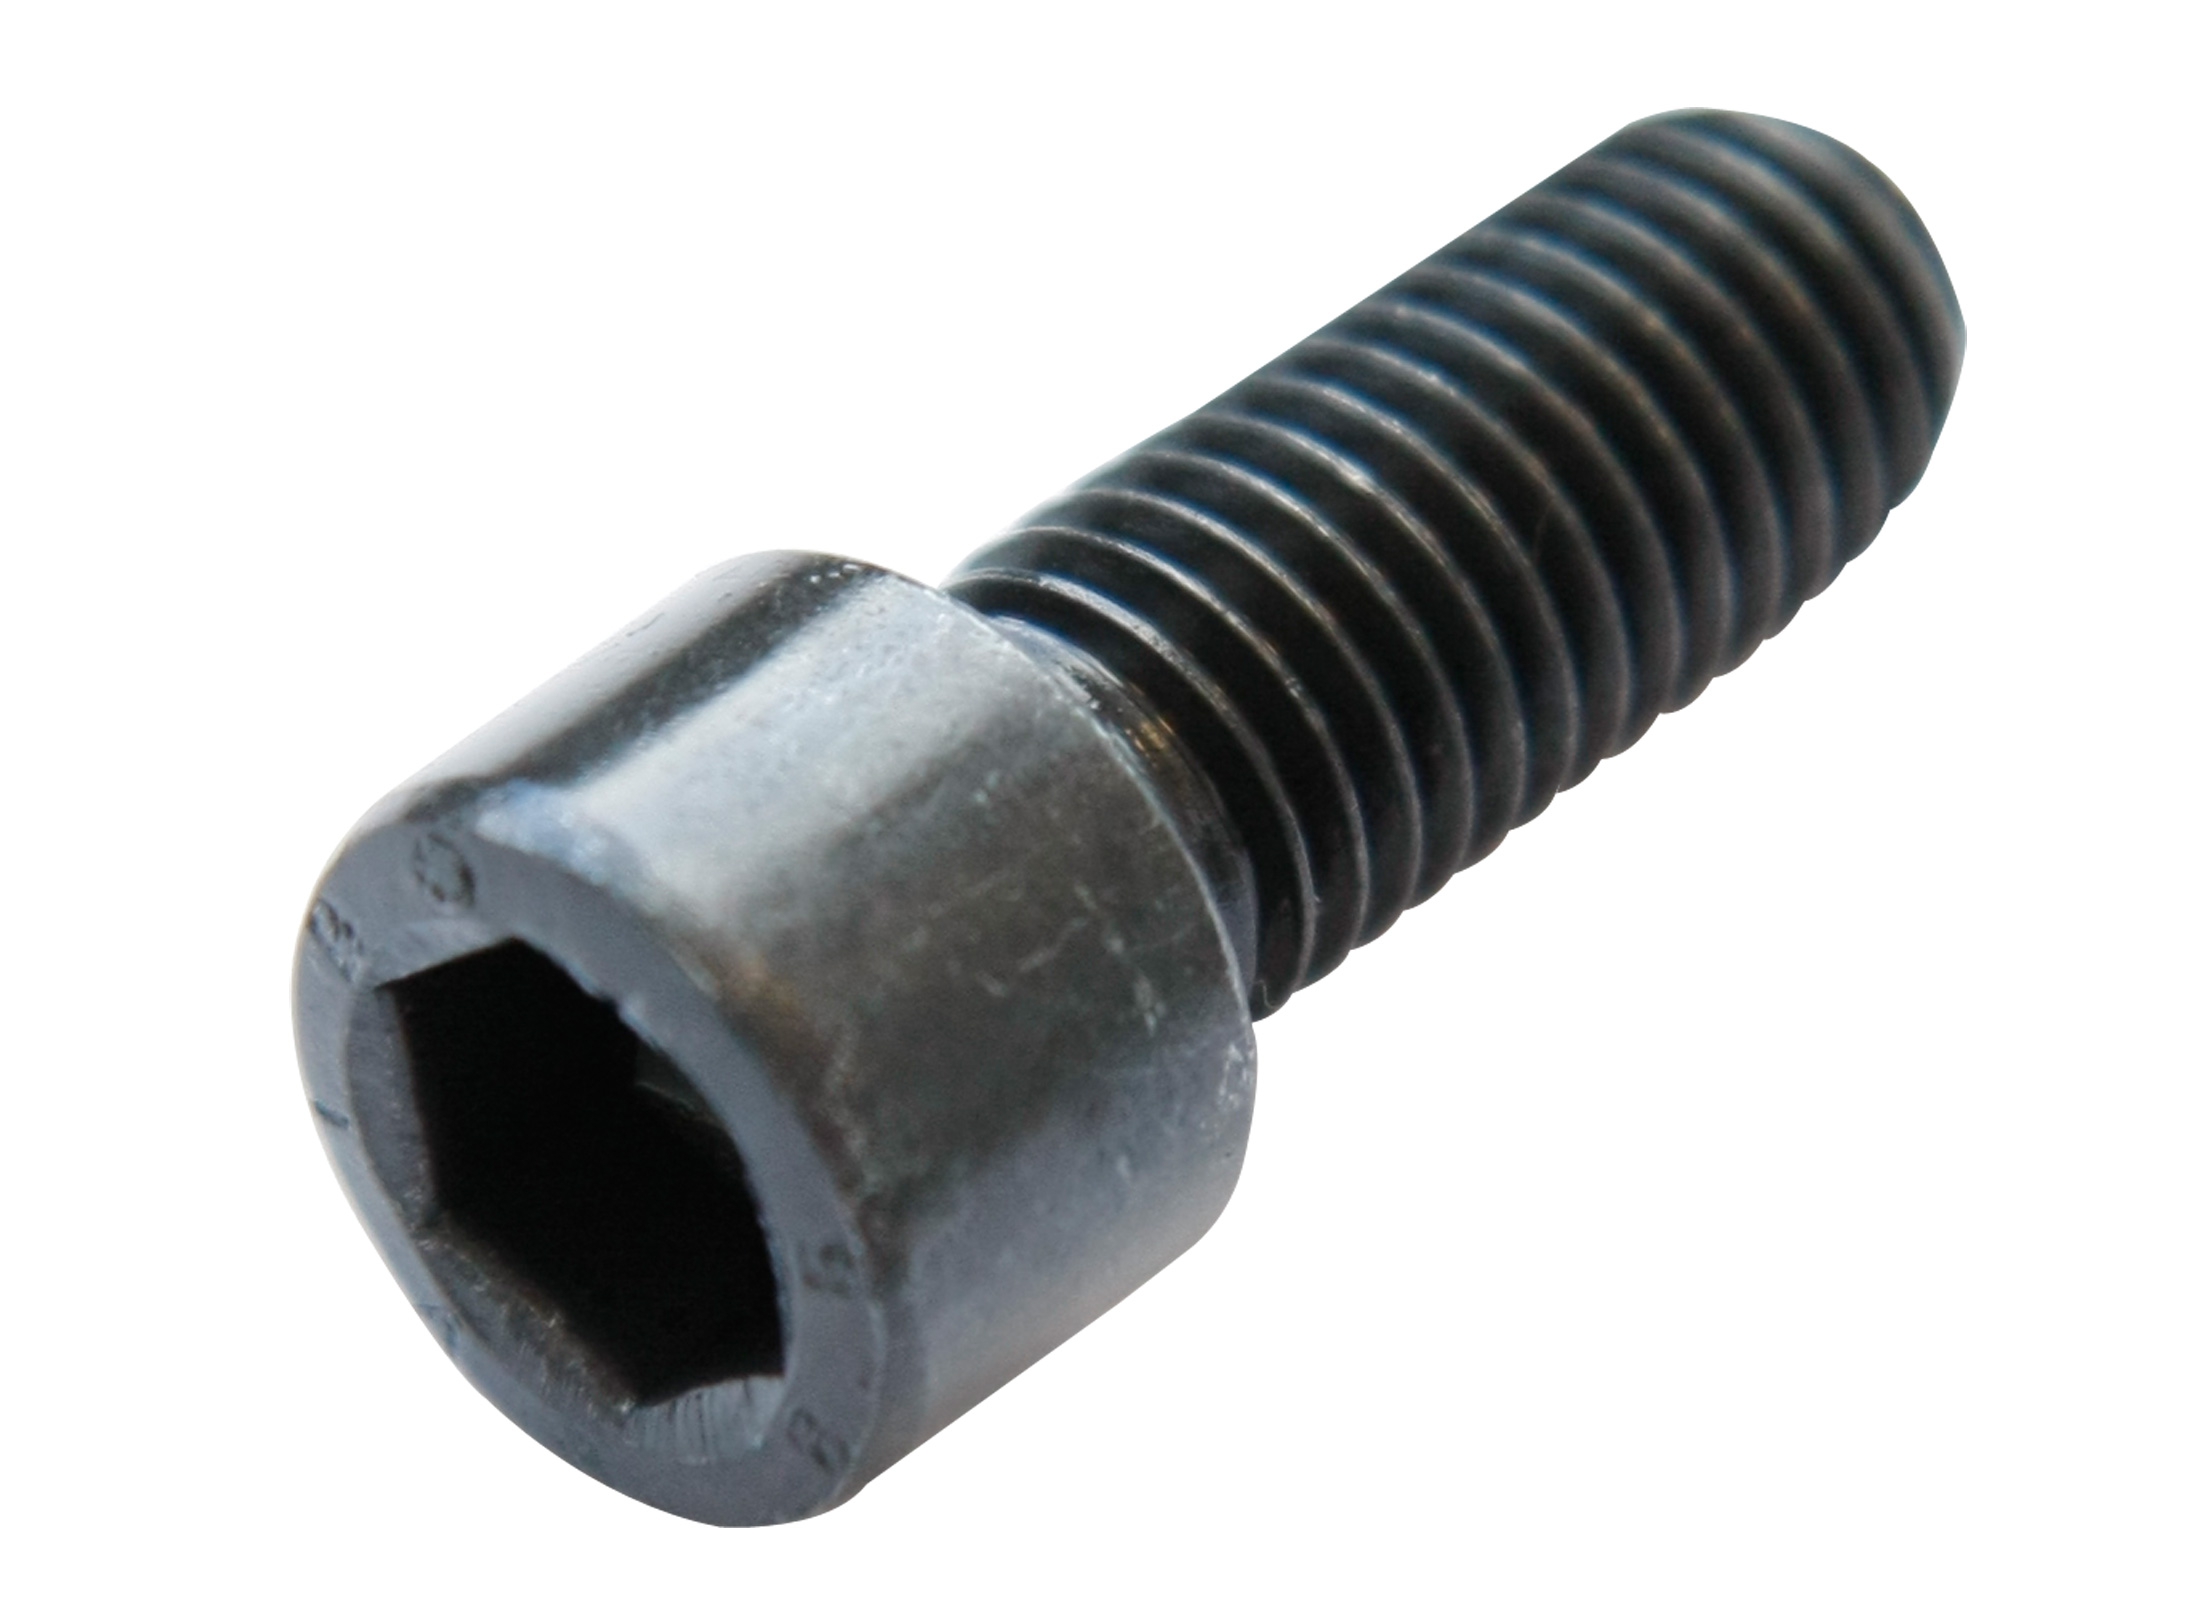 Cylinder Head Cap Screw, black, M12x30mm Online At Low Prices At ...